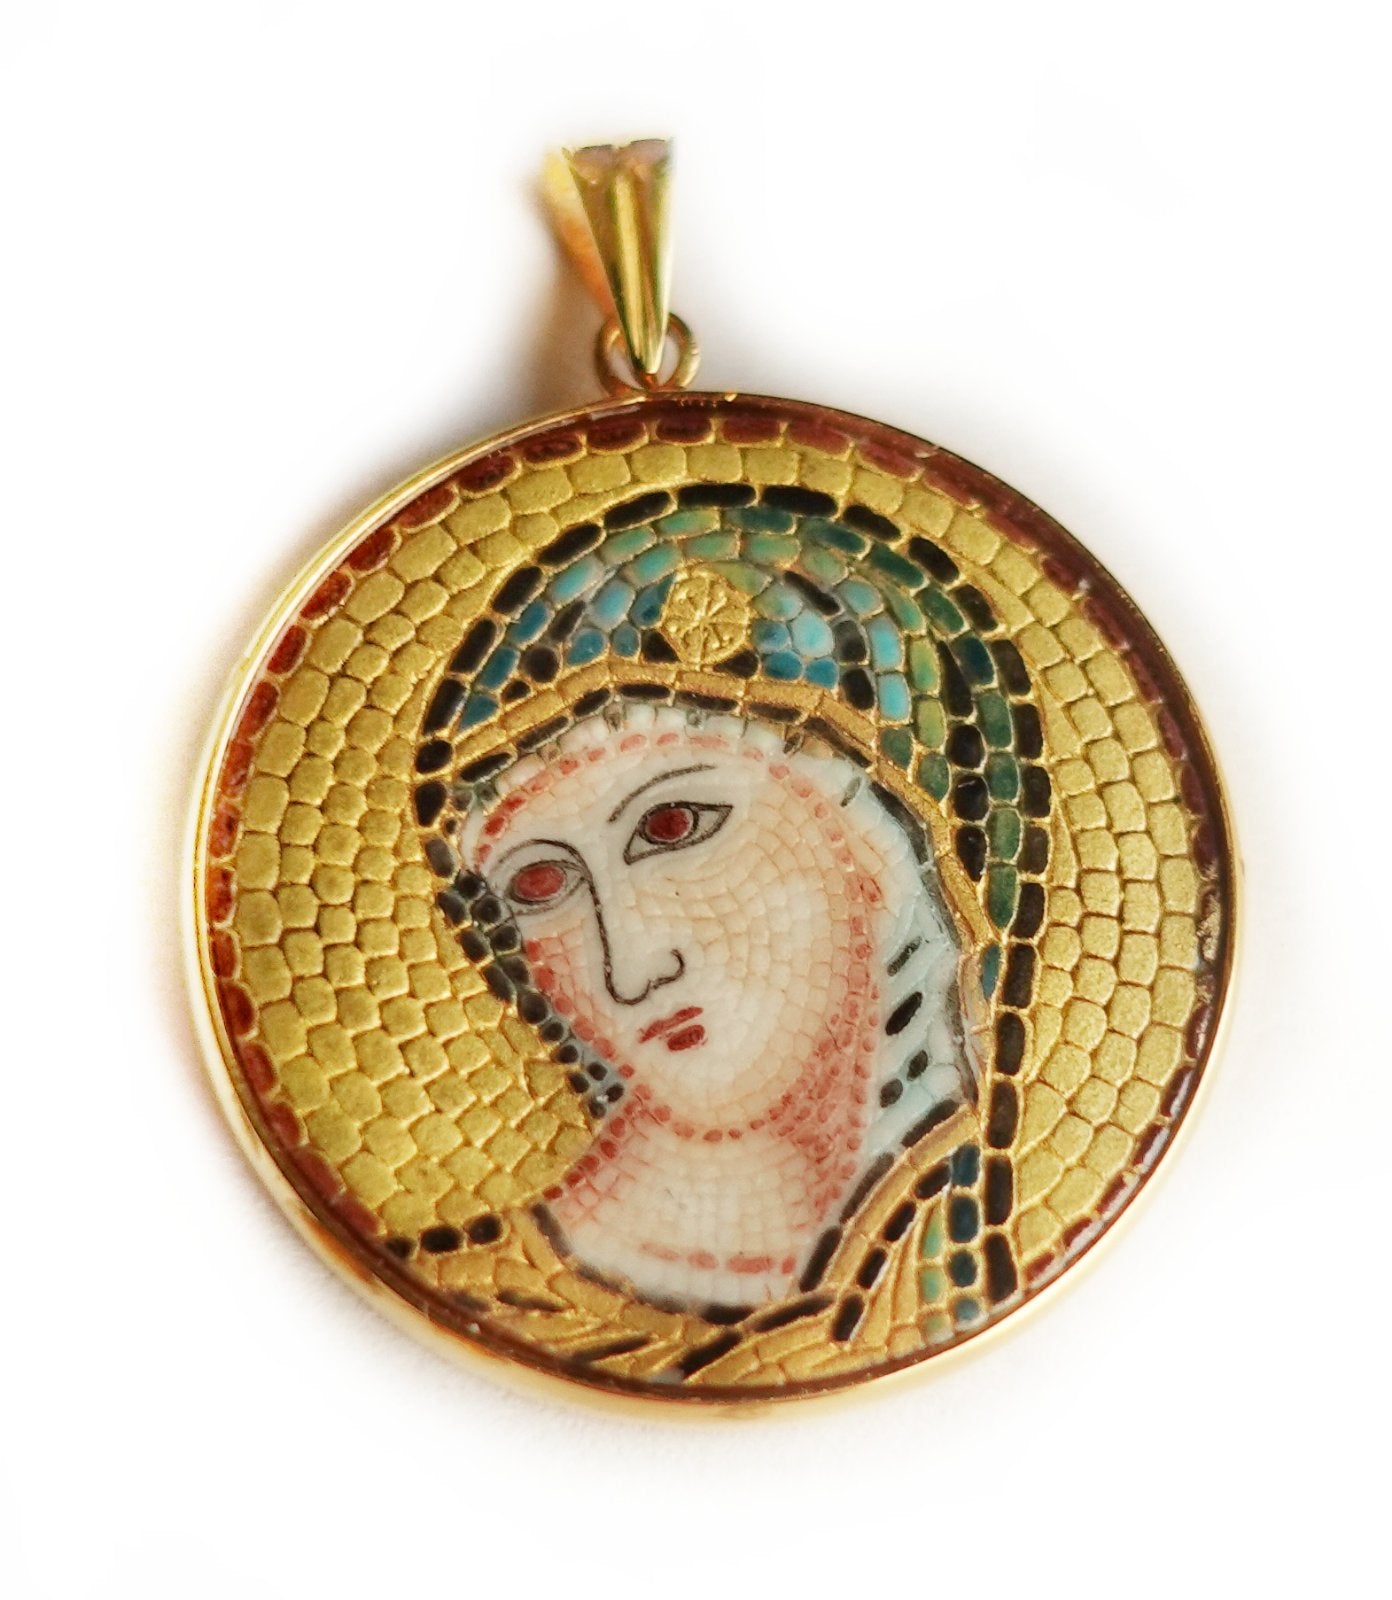 Mother Mary (panagia) micro mosaic pendant in solid 14k gold